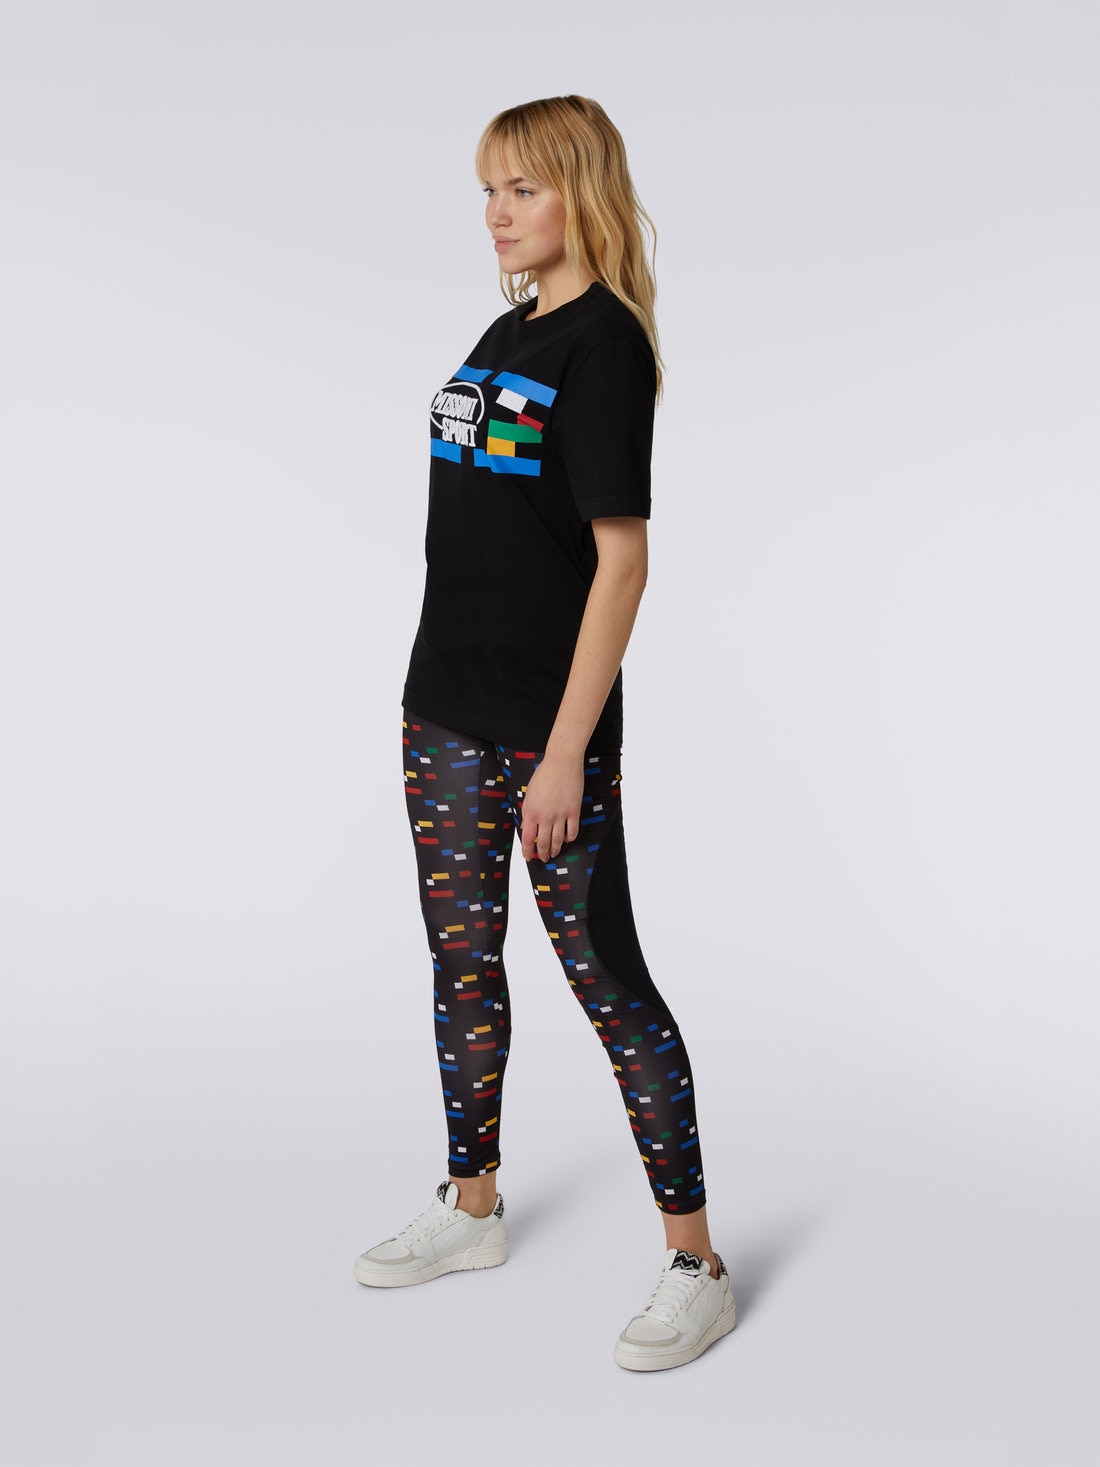 Crew-neck cotton T-shirt with logo and contrasting piping, Black & Multicoloured  - DC23SL00BJ00EBS91E4 - 2